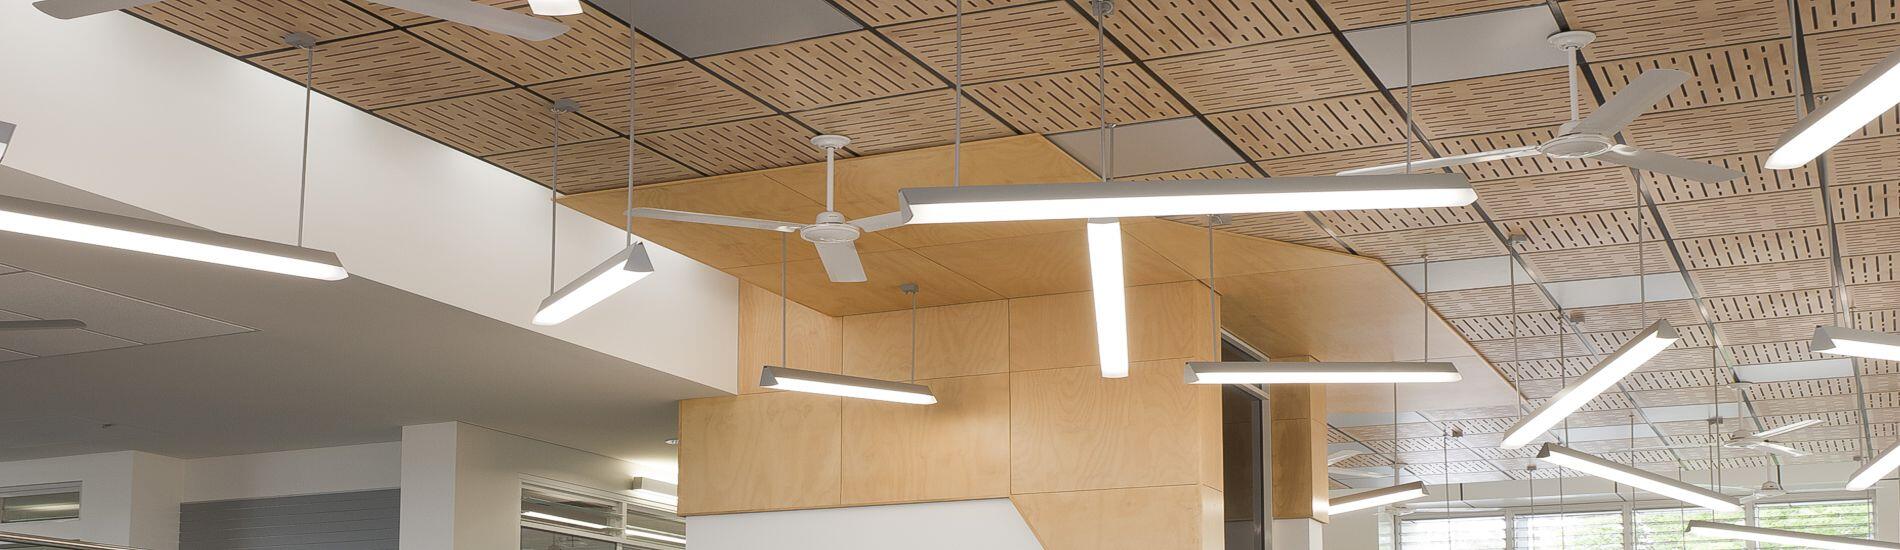 SUPATILE Drop-in Ceiling Tiles Provide Acoustic and Budget Solutions for School Library